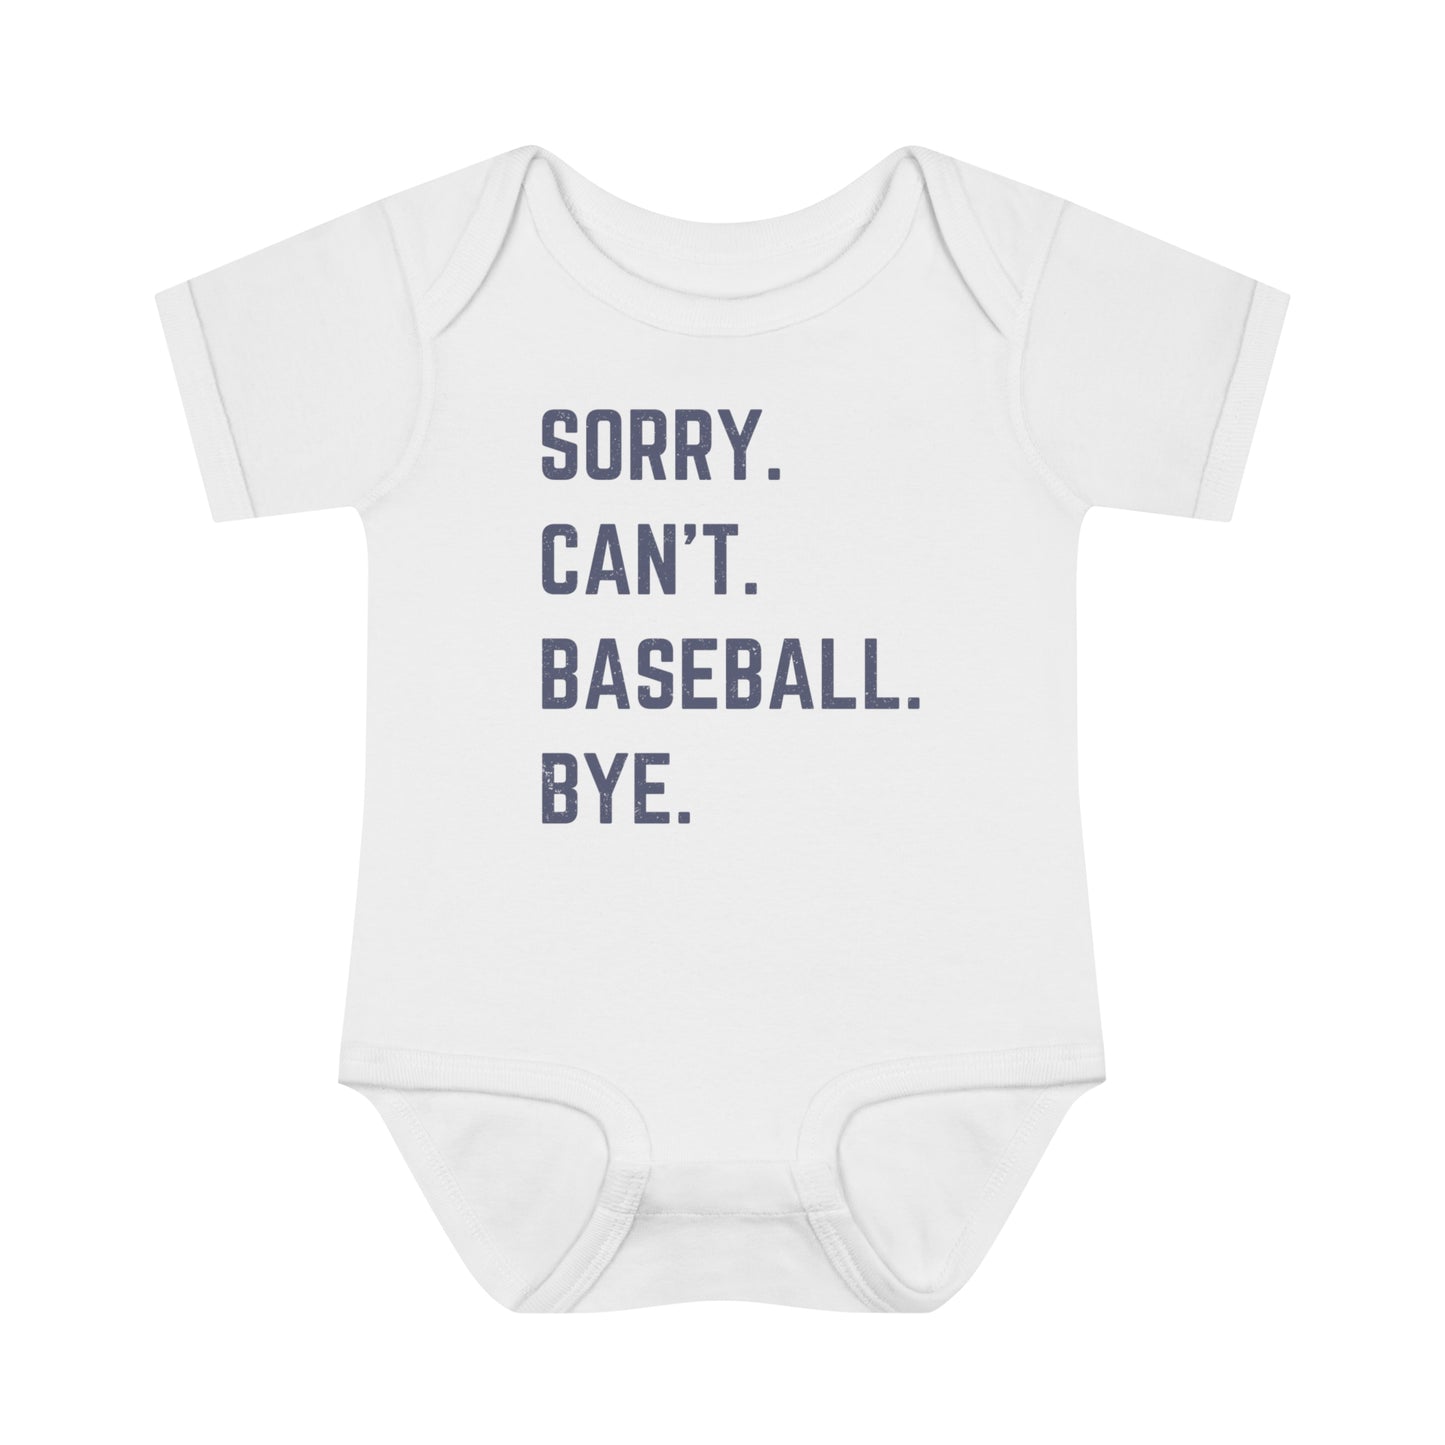 Sorry. Can't. Baseball. Bye. Bodysuit | Baseball Baby Outfit